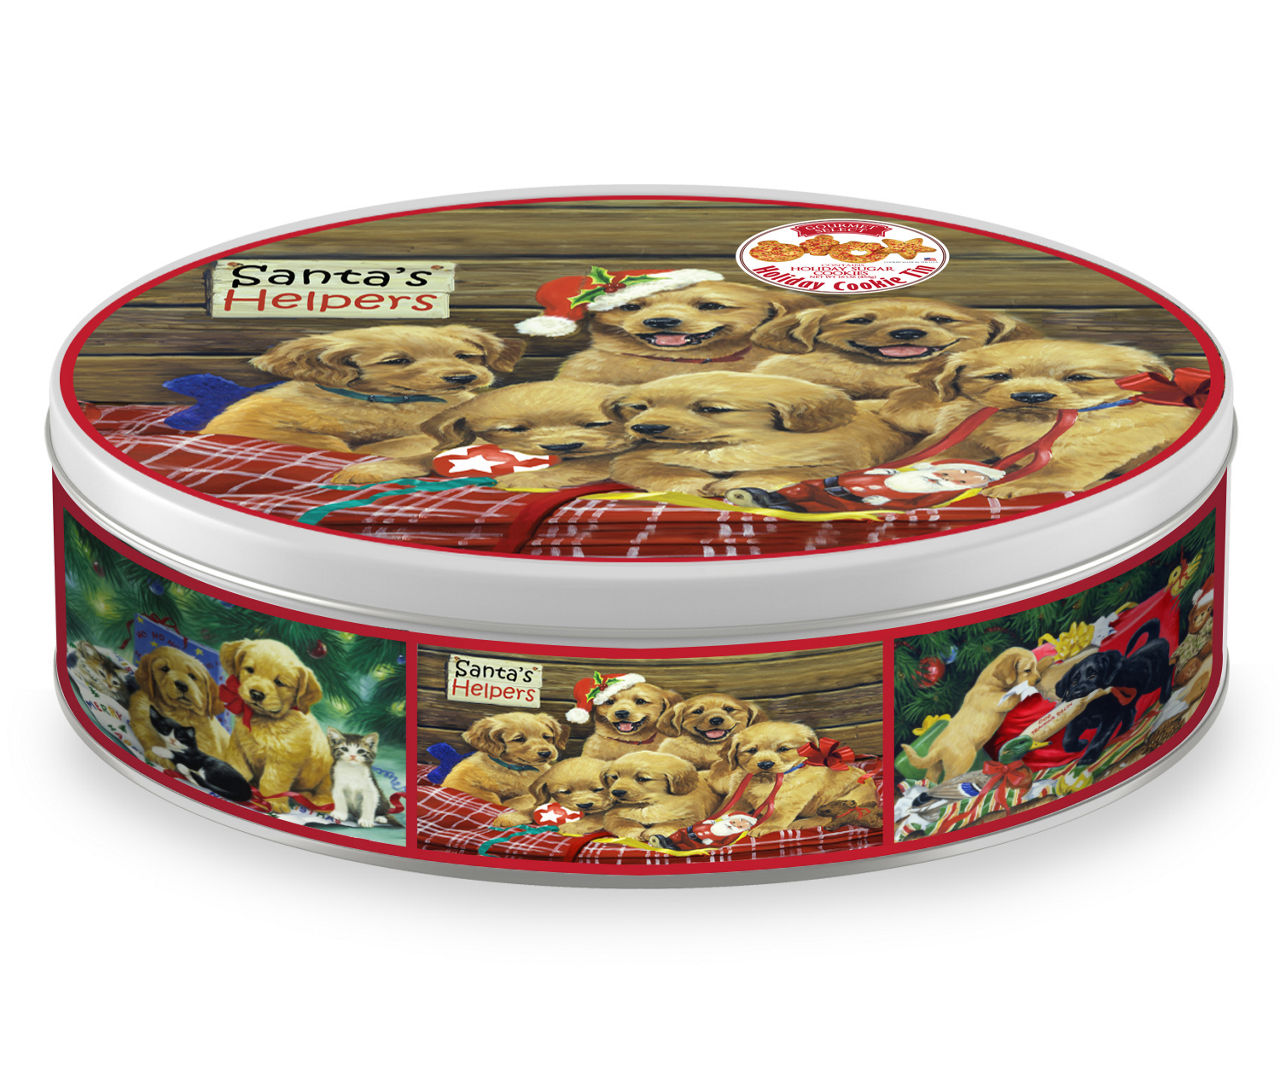 Holiday Cookie Tin